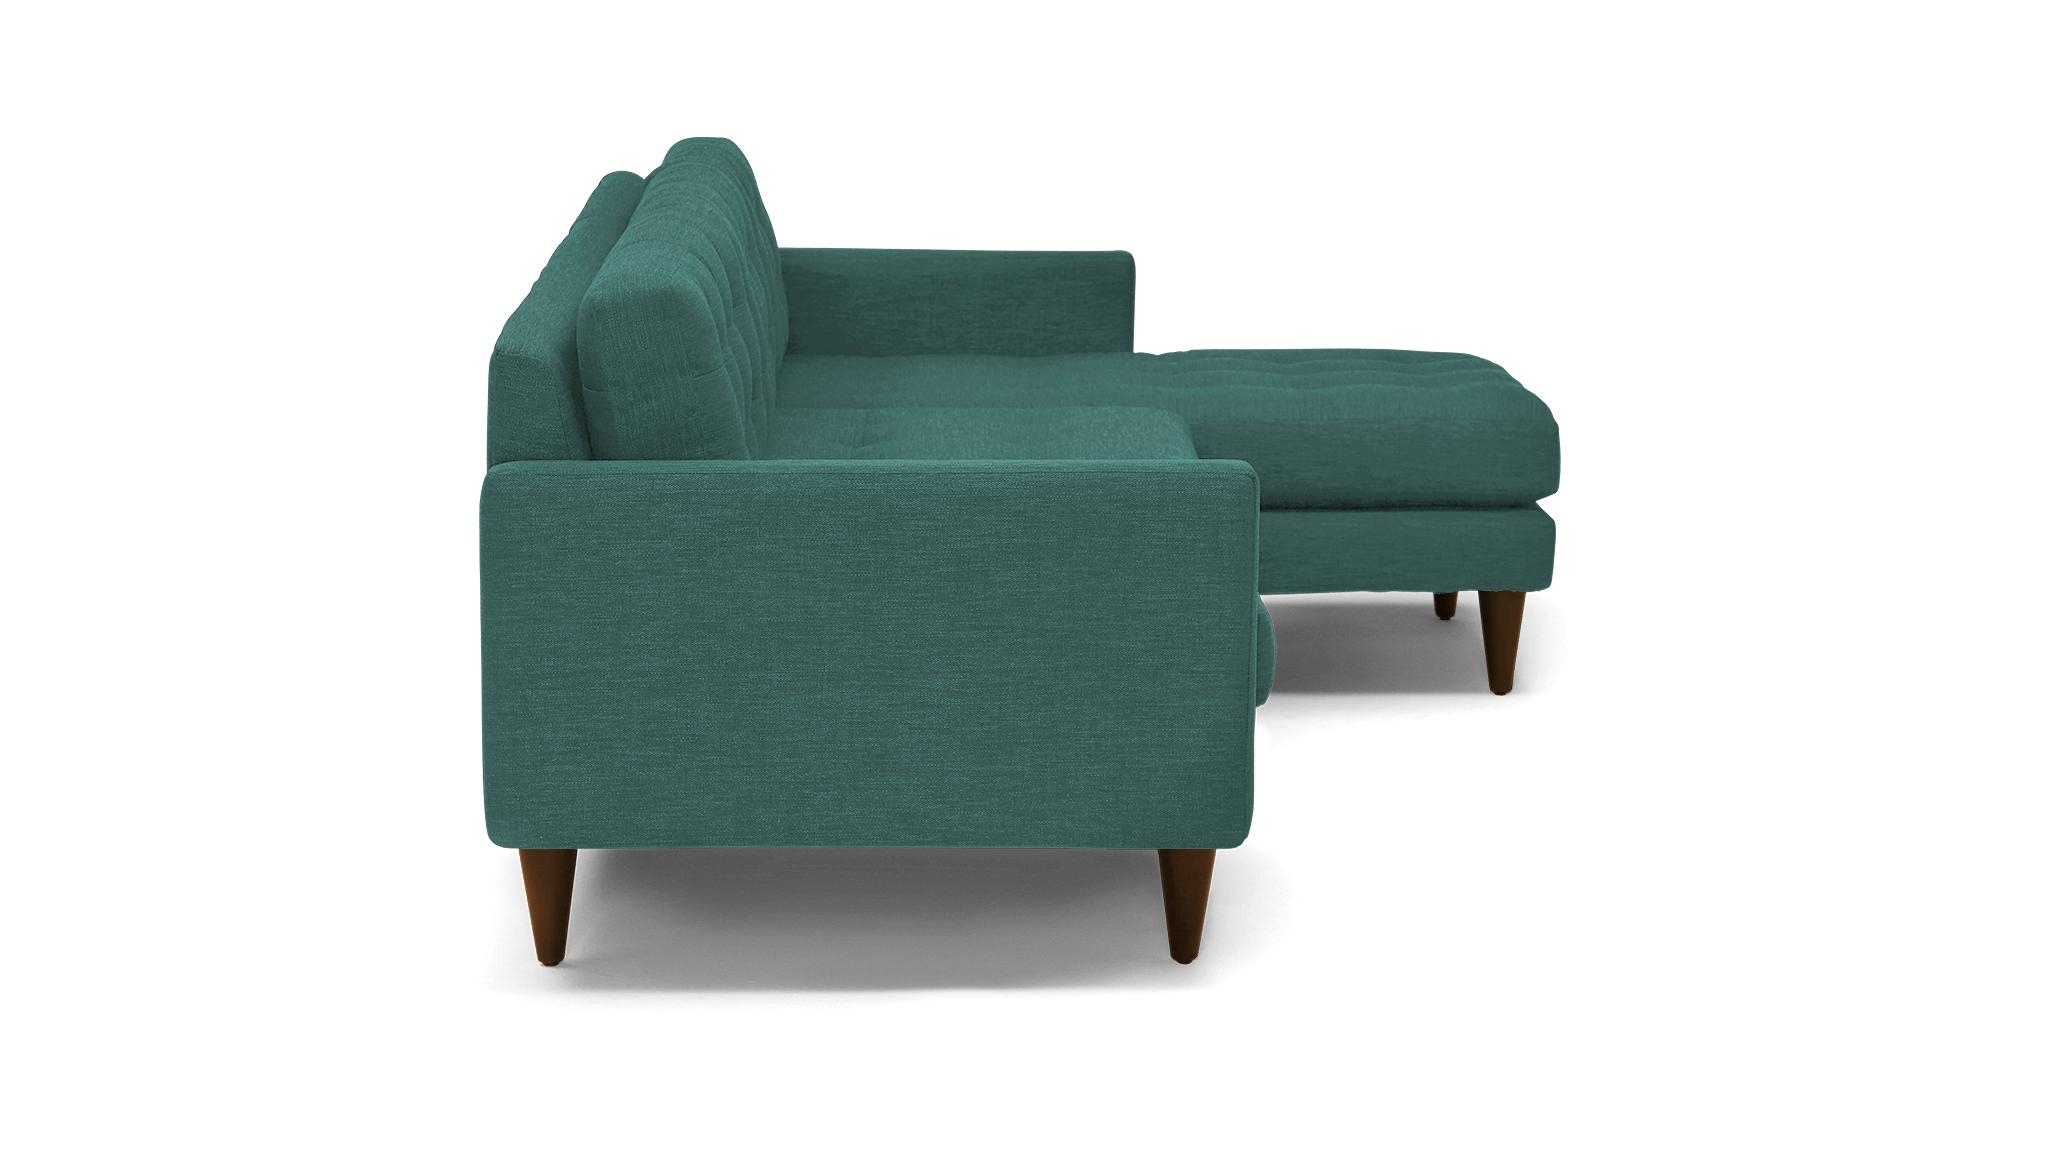 Blue Eliot Mid Century Modern Sectional - Prime Peacock - Mocha - Right - Image 2